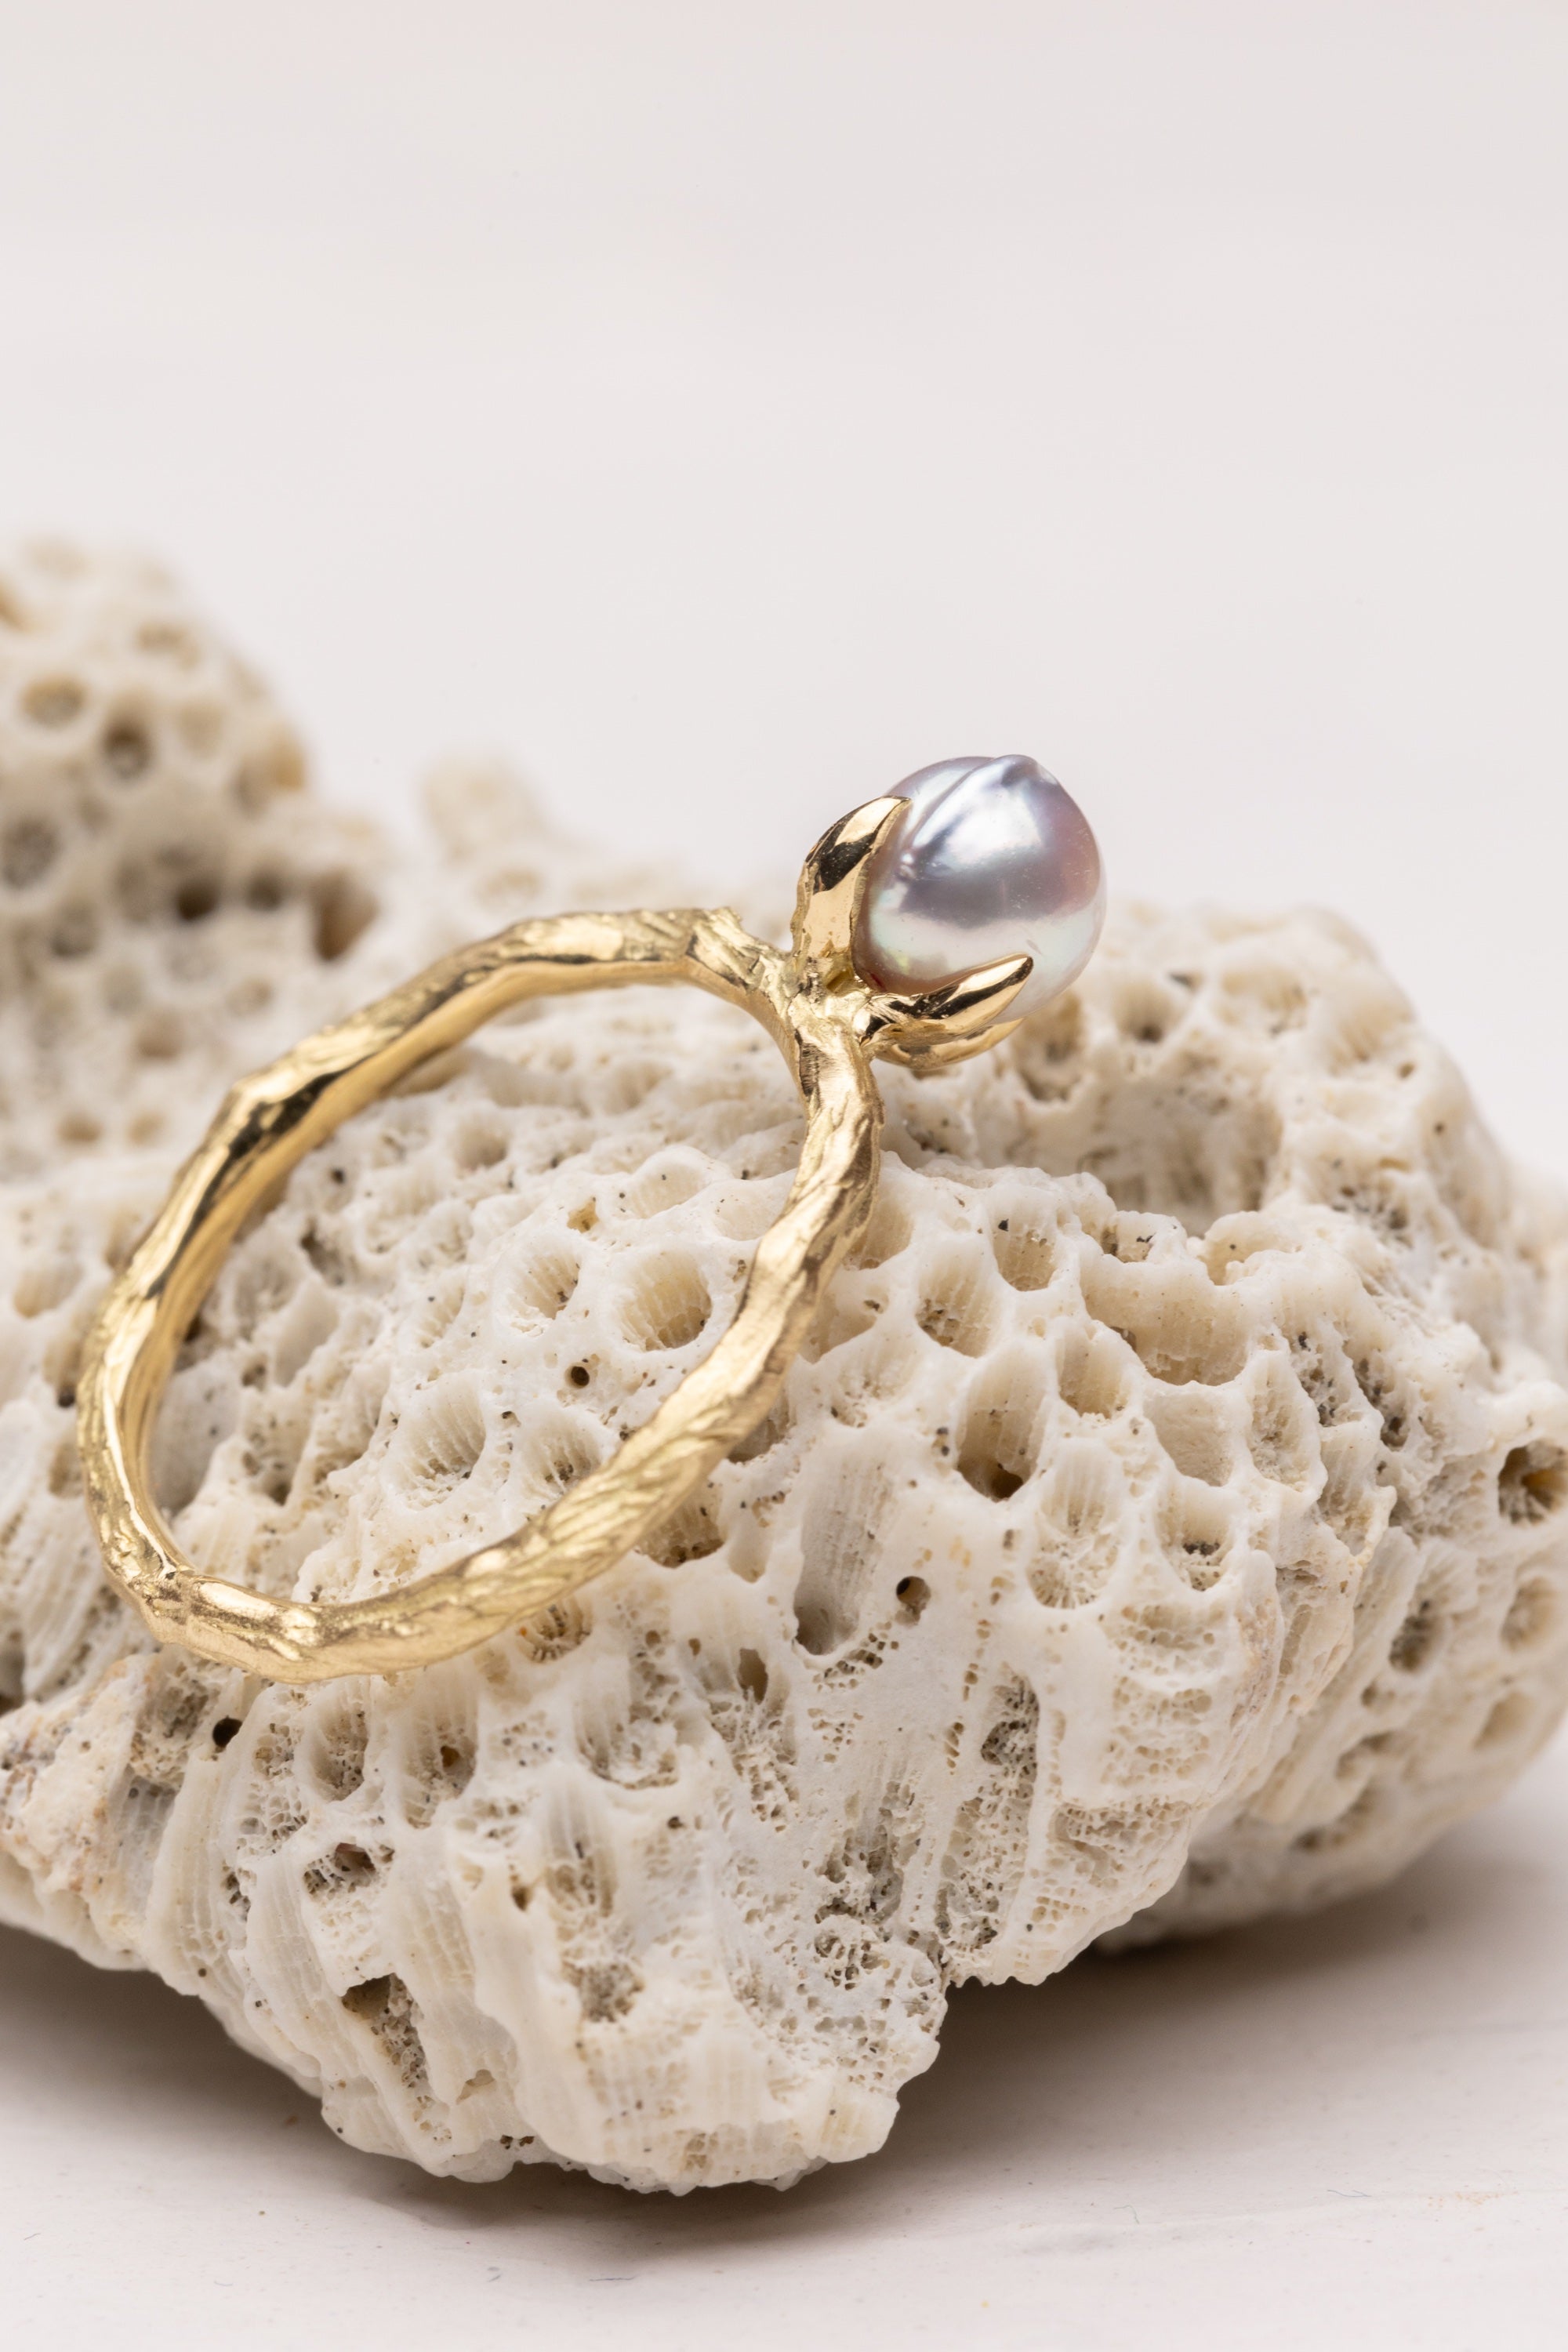 Branch | The Akoya Pearl Ring - Small (18k)